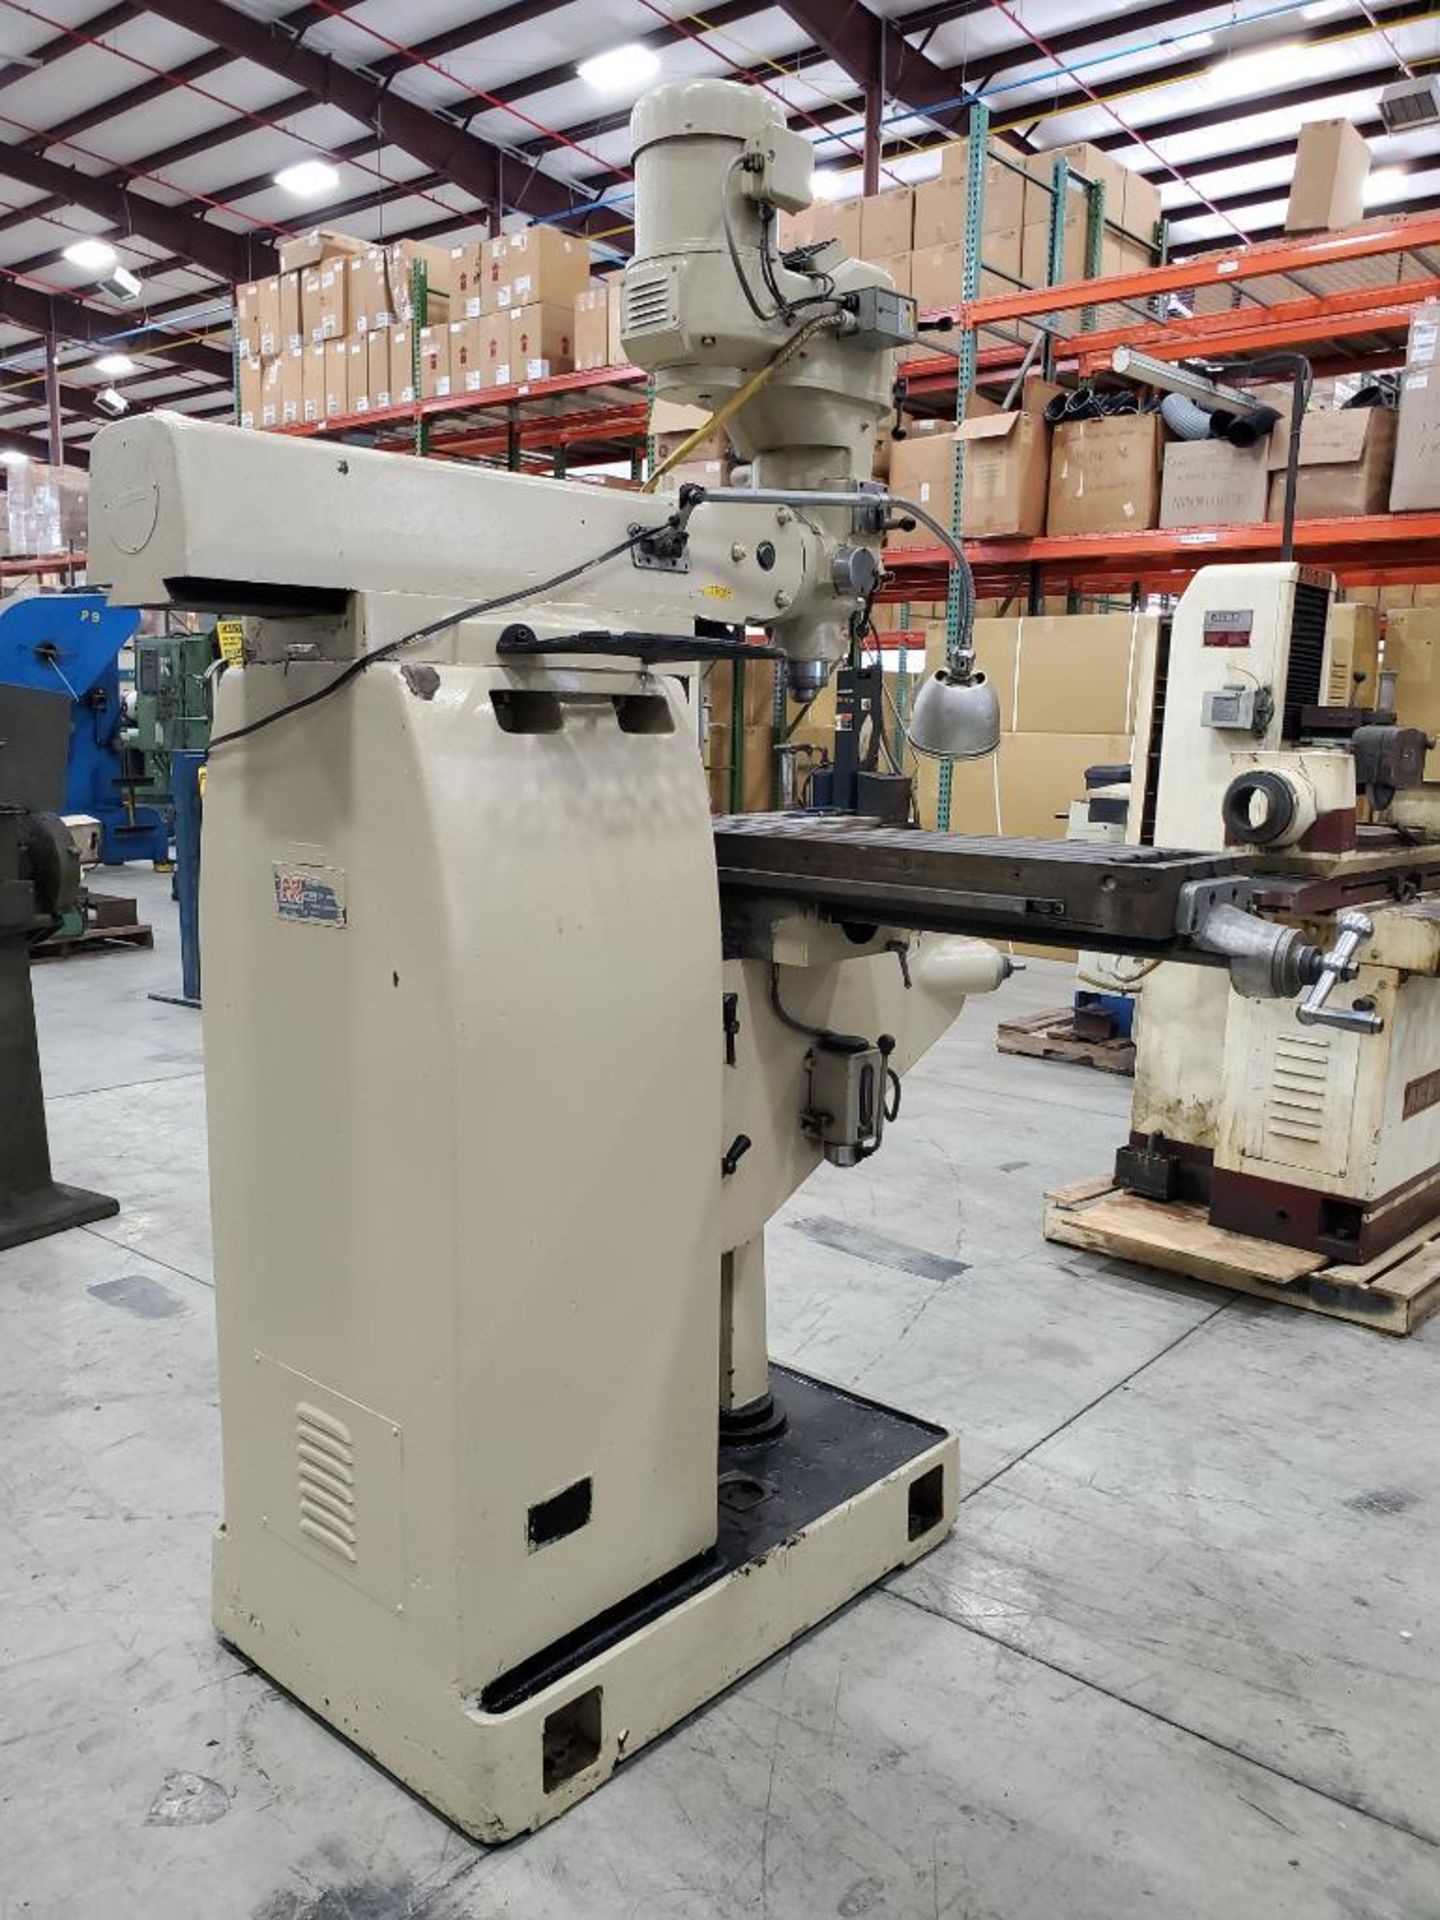 Sharp Vertical Milling Machine, 3 HP, 51" x 10-1/4" Table, Millman LH51 2-Axis Control, Knee Bed, 5" - Image 10 of 11